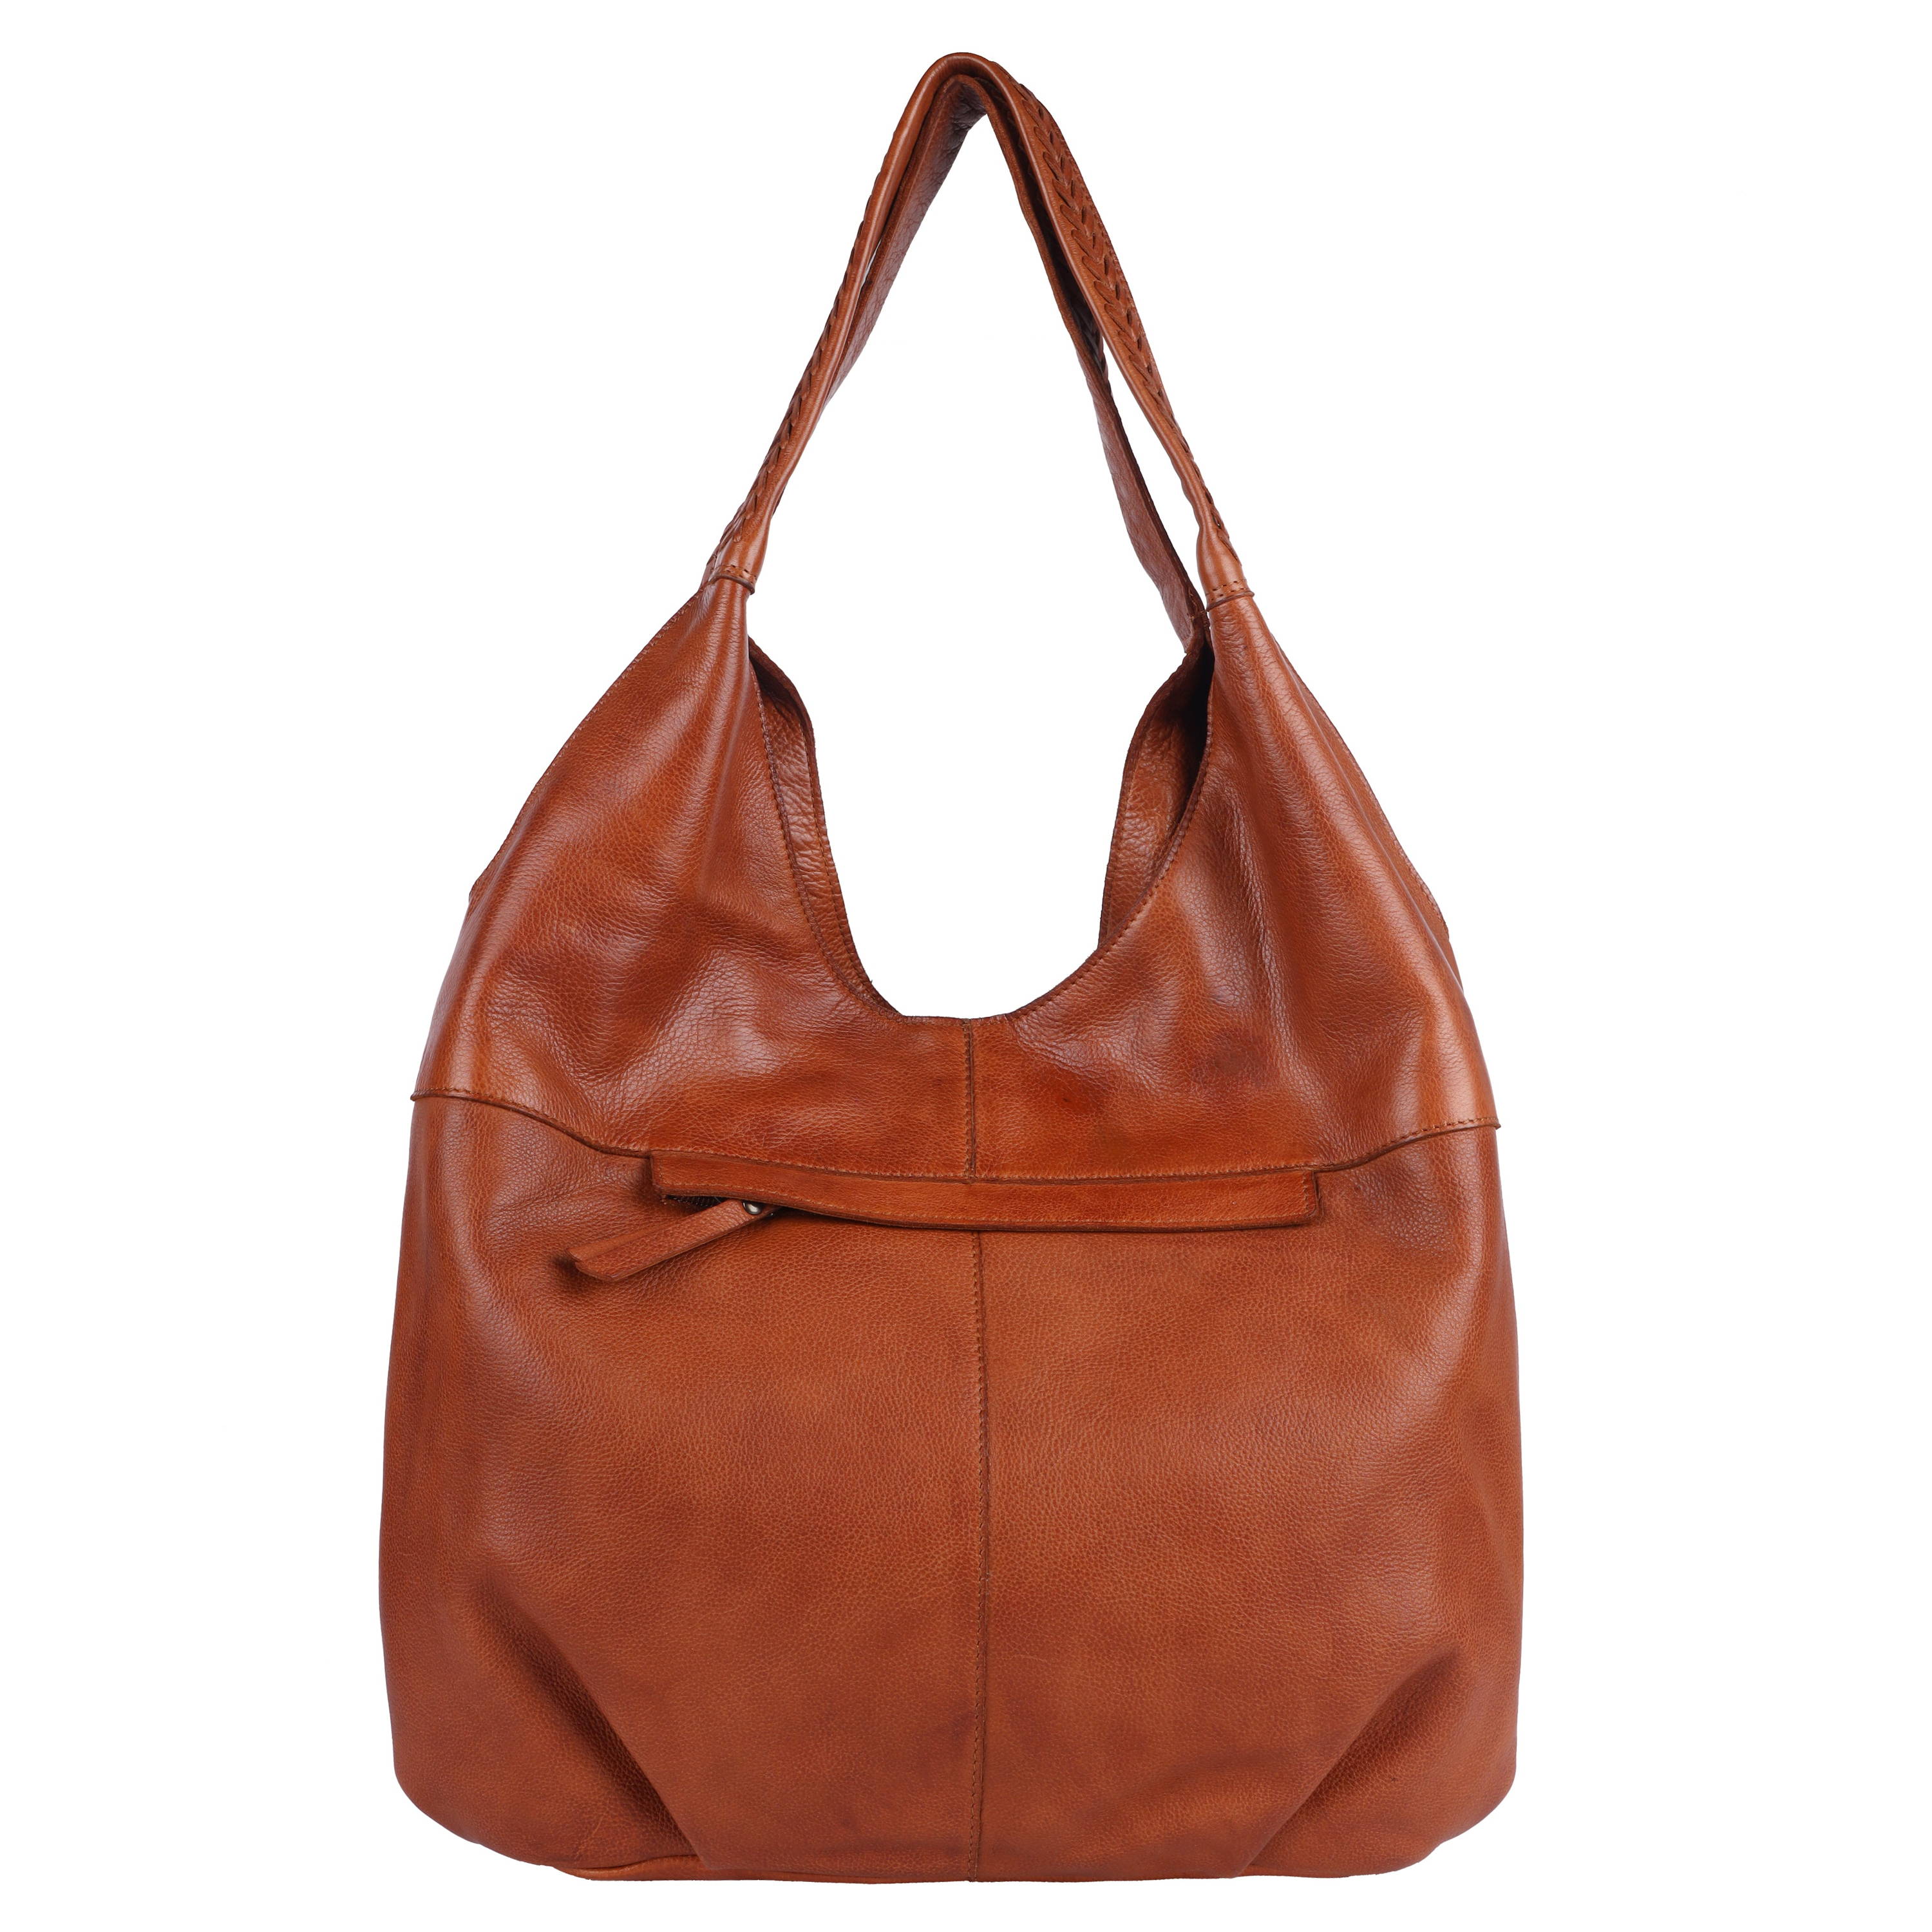 Camila Shoulderbag is made with 100% Leather. Handcrafted by artisans in South America and India